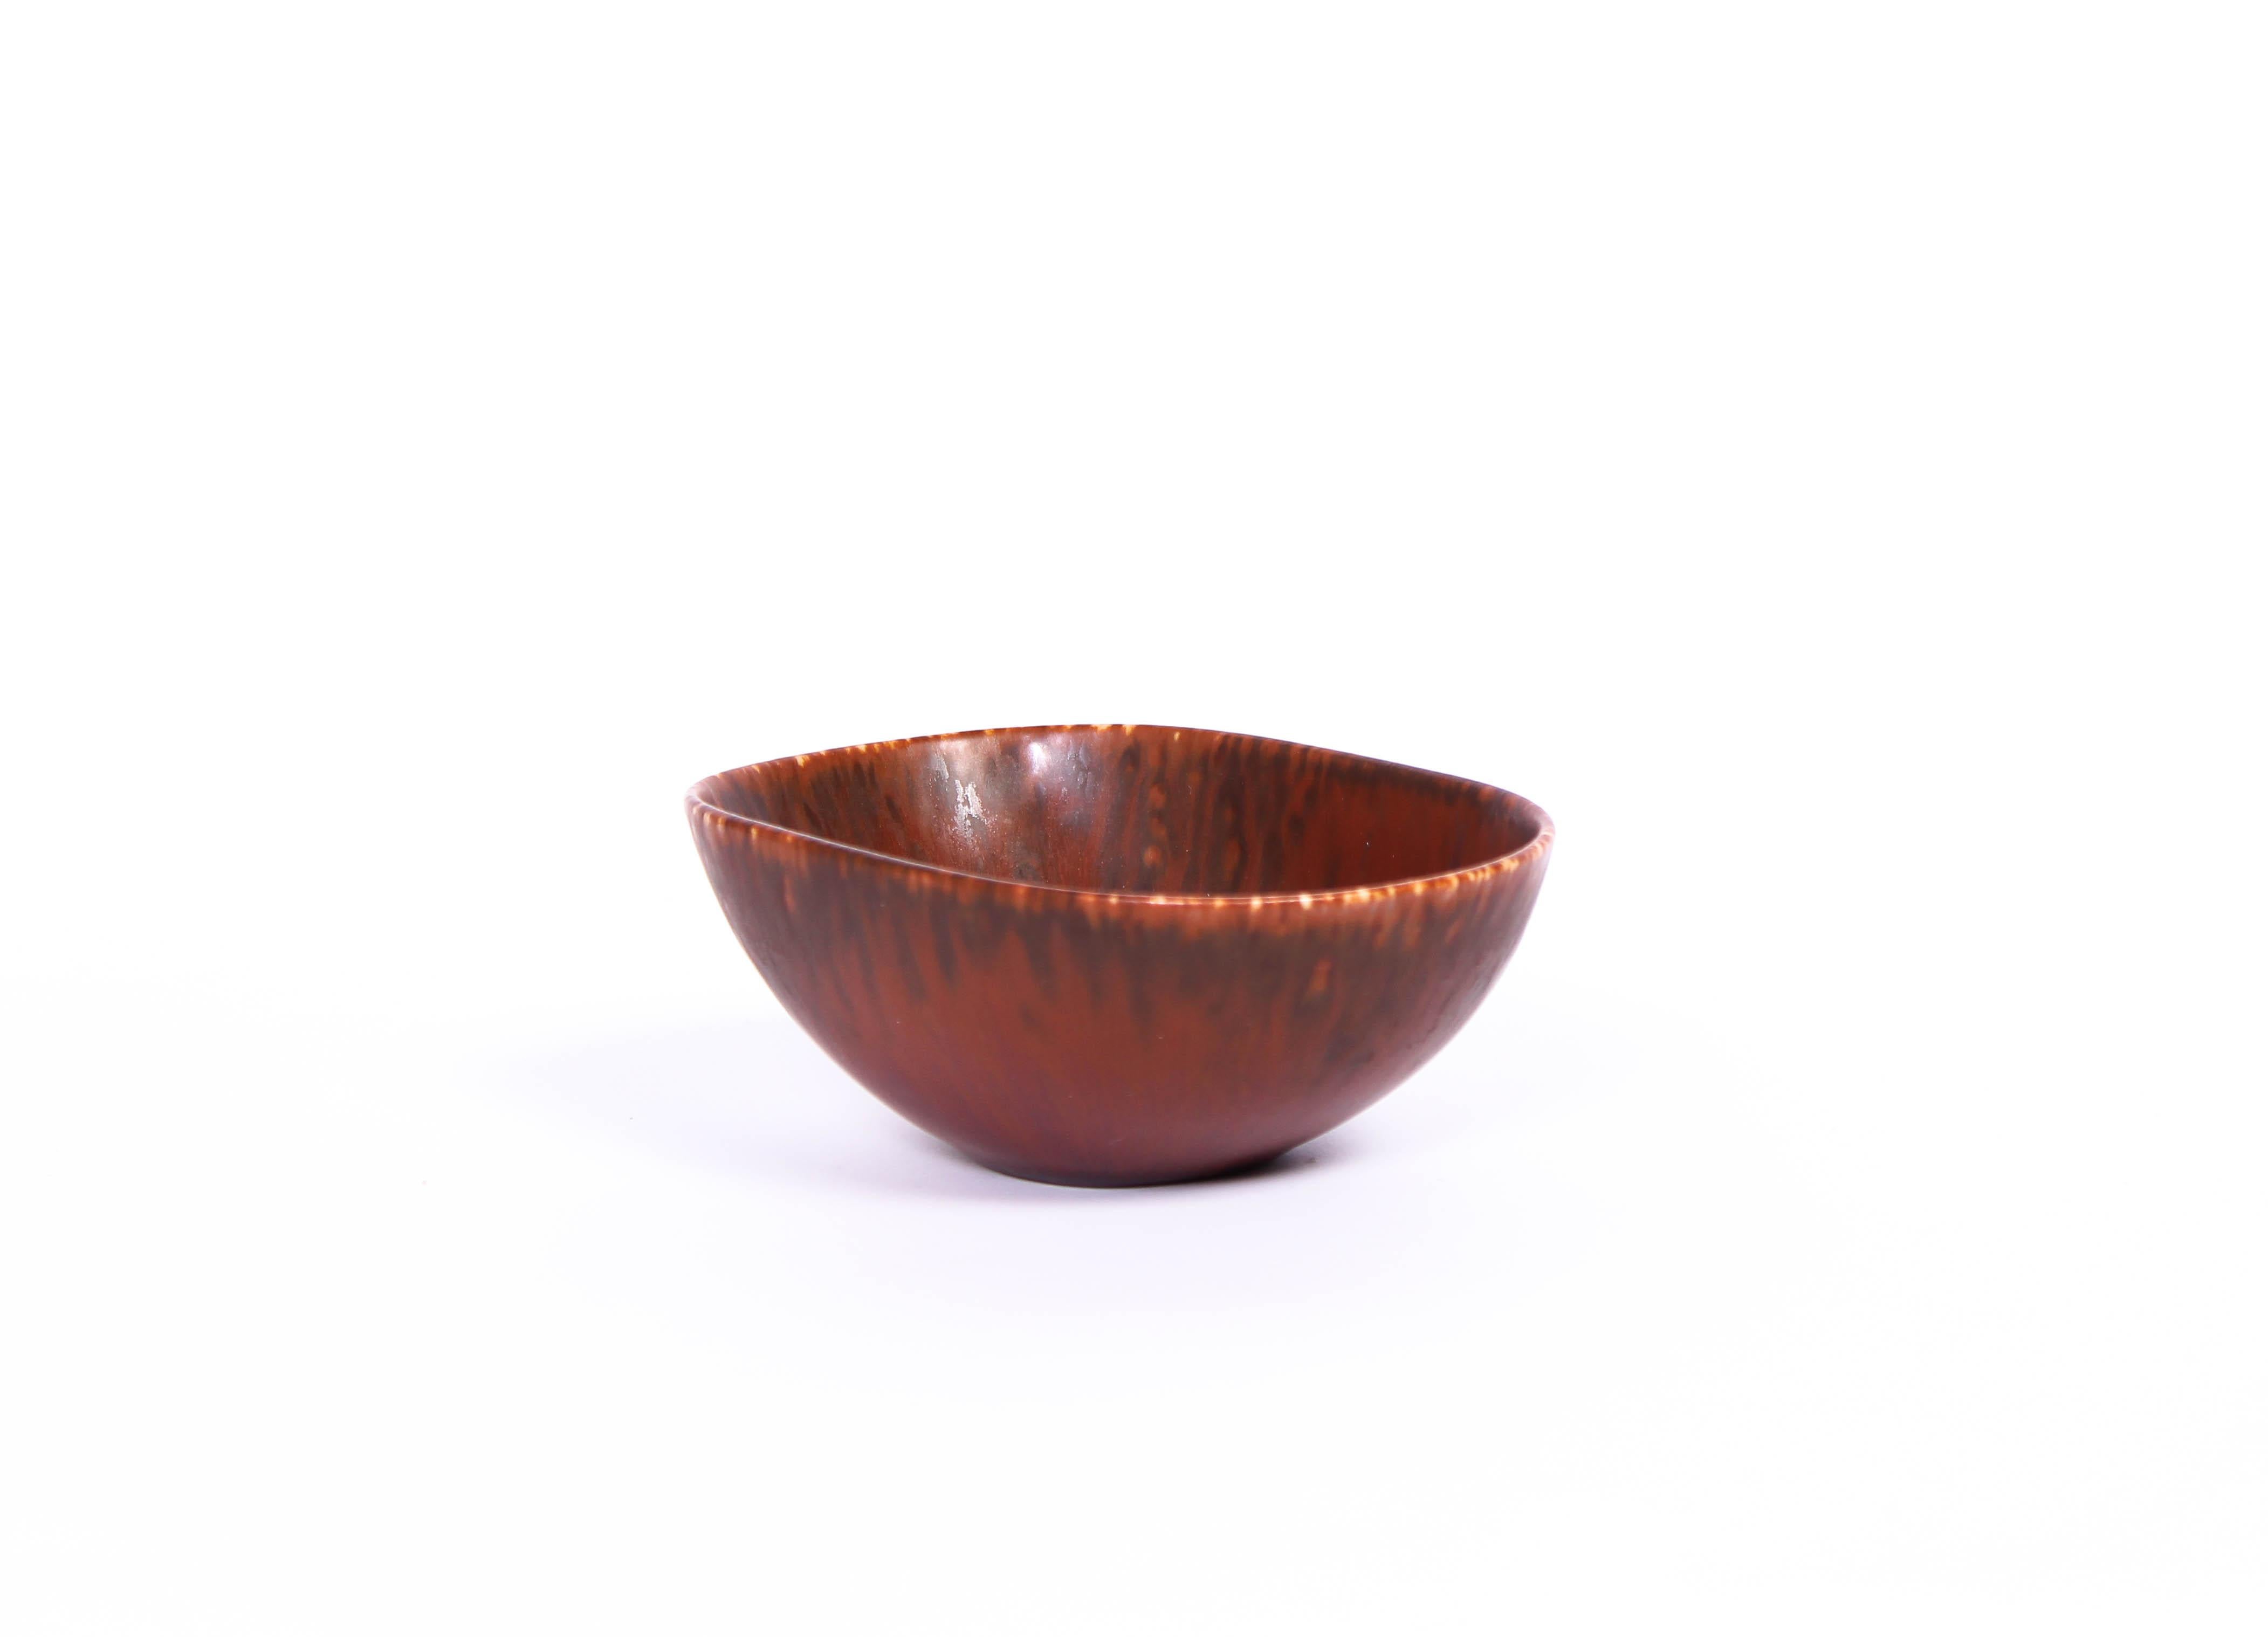 A brown ceramic bowl designed by Carl-Harry Stålhane and produced by Rörstrand. The bowl is in good condition and very decorative.